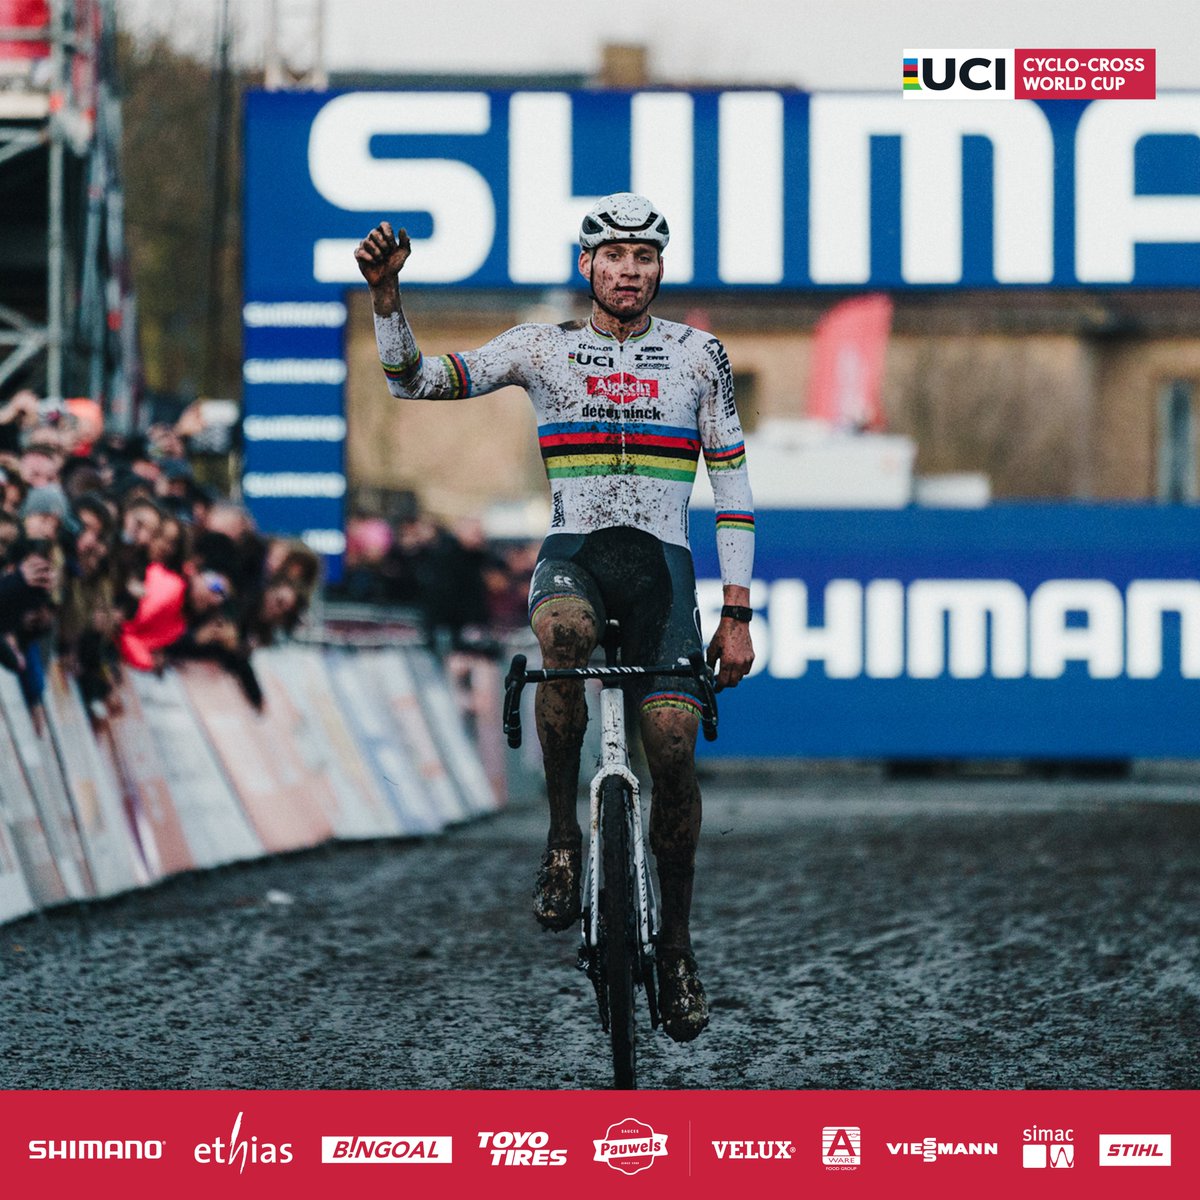 Give him a round of applause! 👏 #CXWorldCup